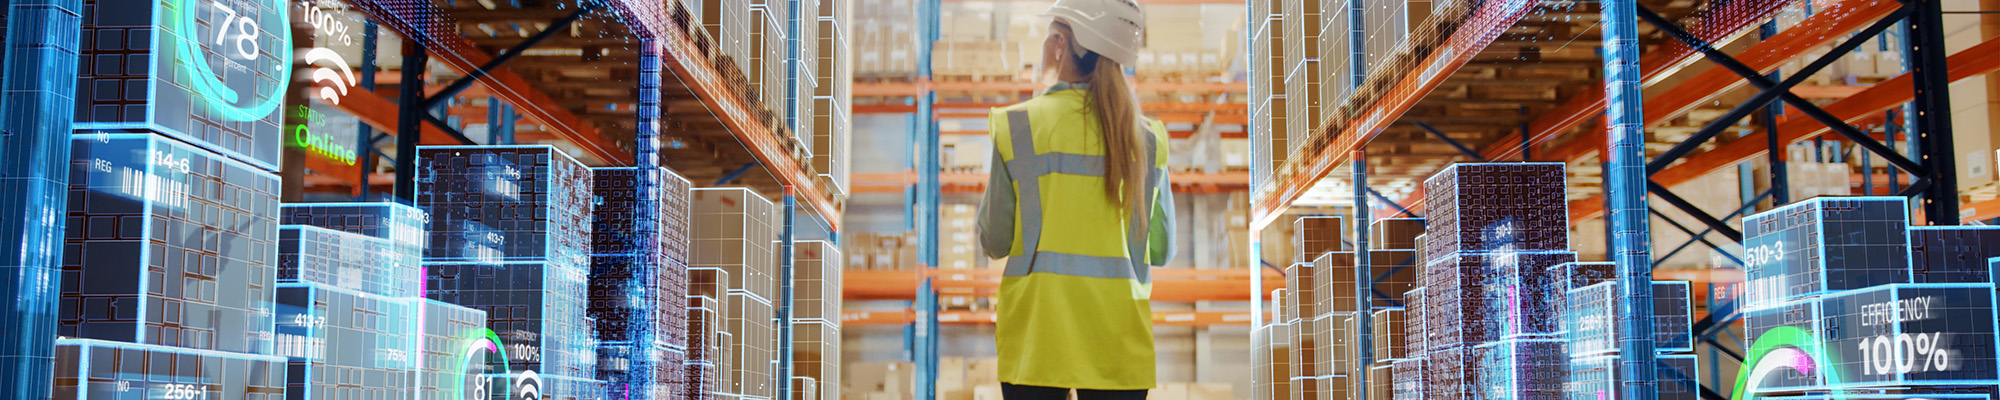 worker standing in warehouse while AI surveys efficiency ratings